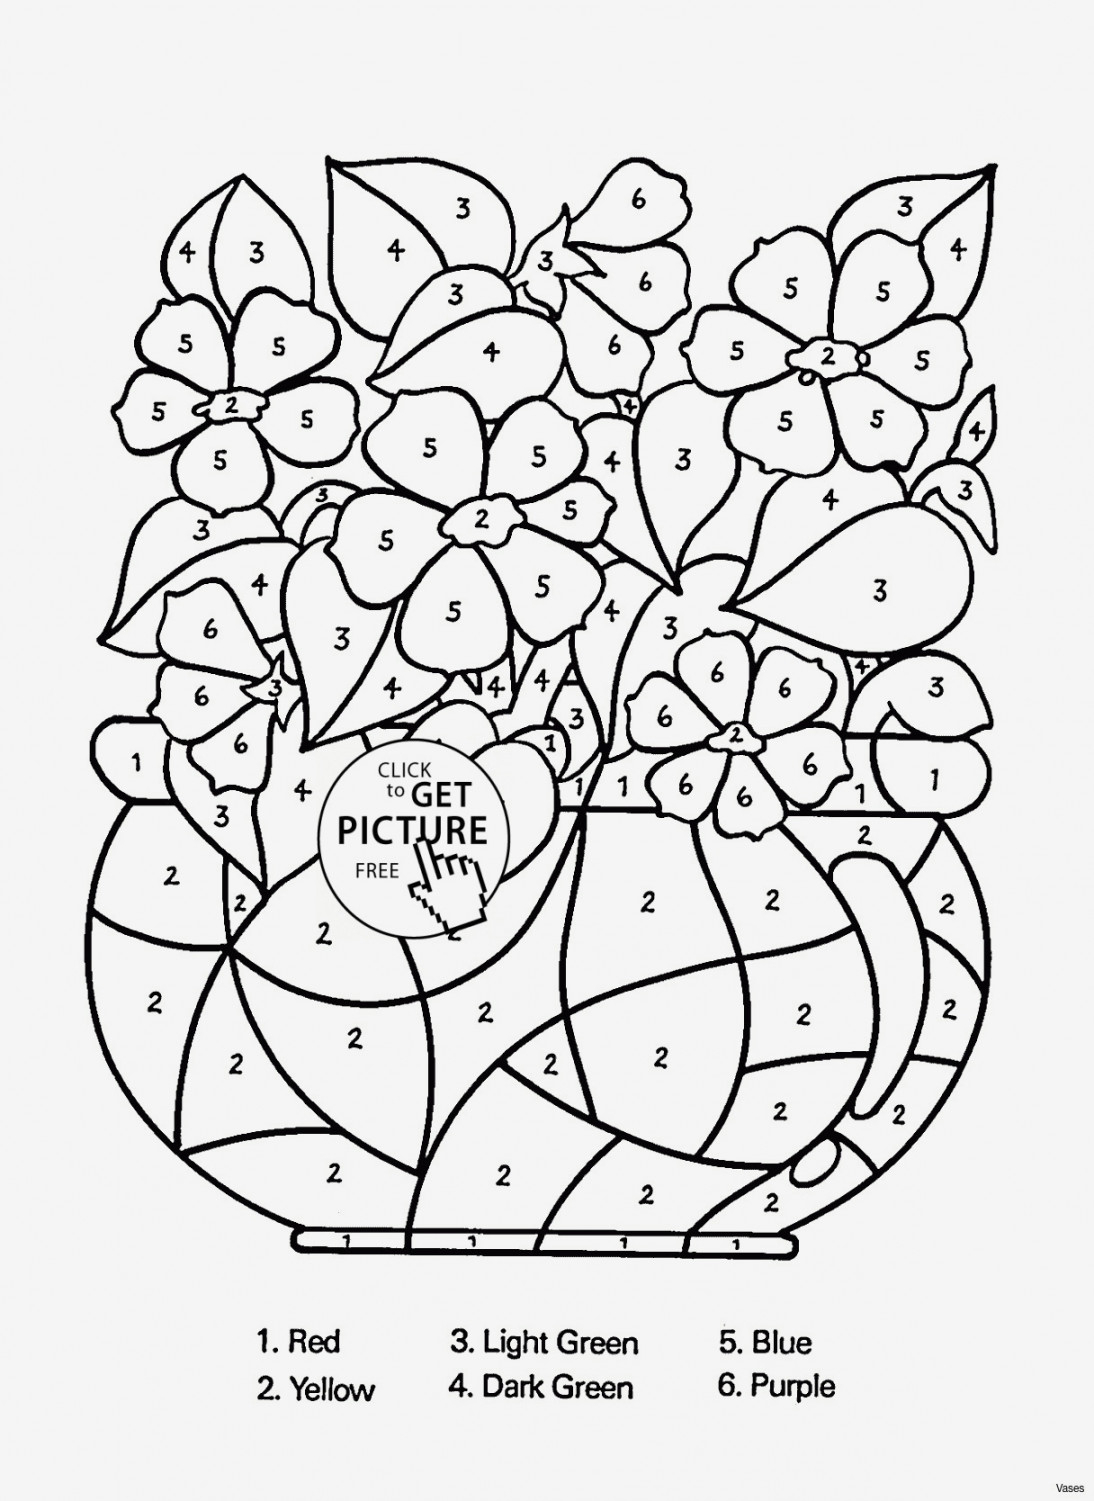 Mandala Coloring Pages Free Online Coloring Pages Remarkable Mandala Coloring For Kids Picture